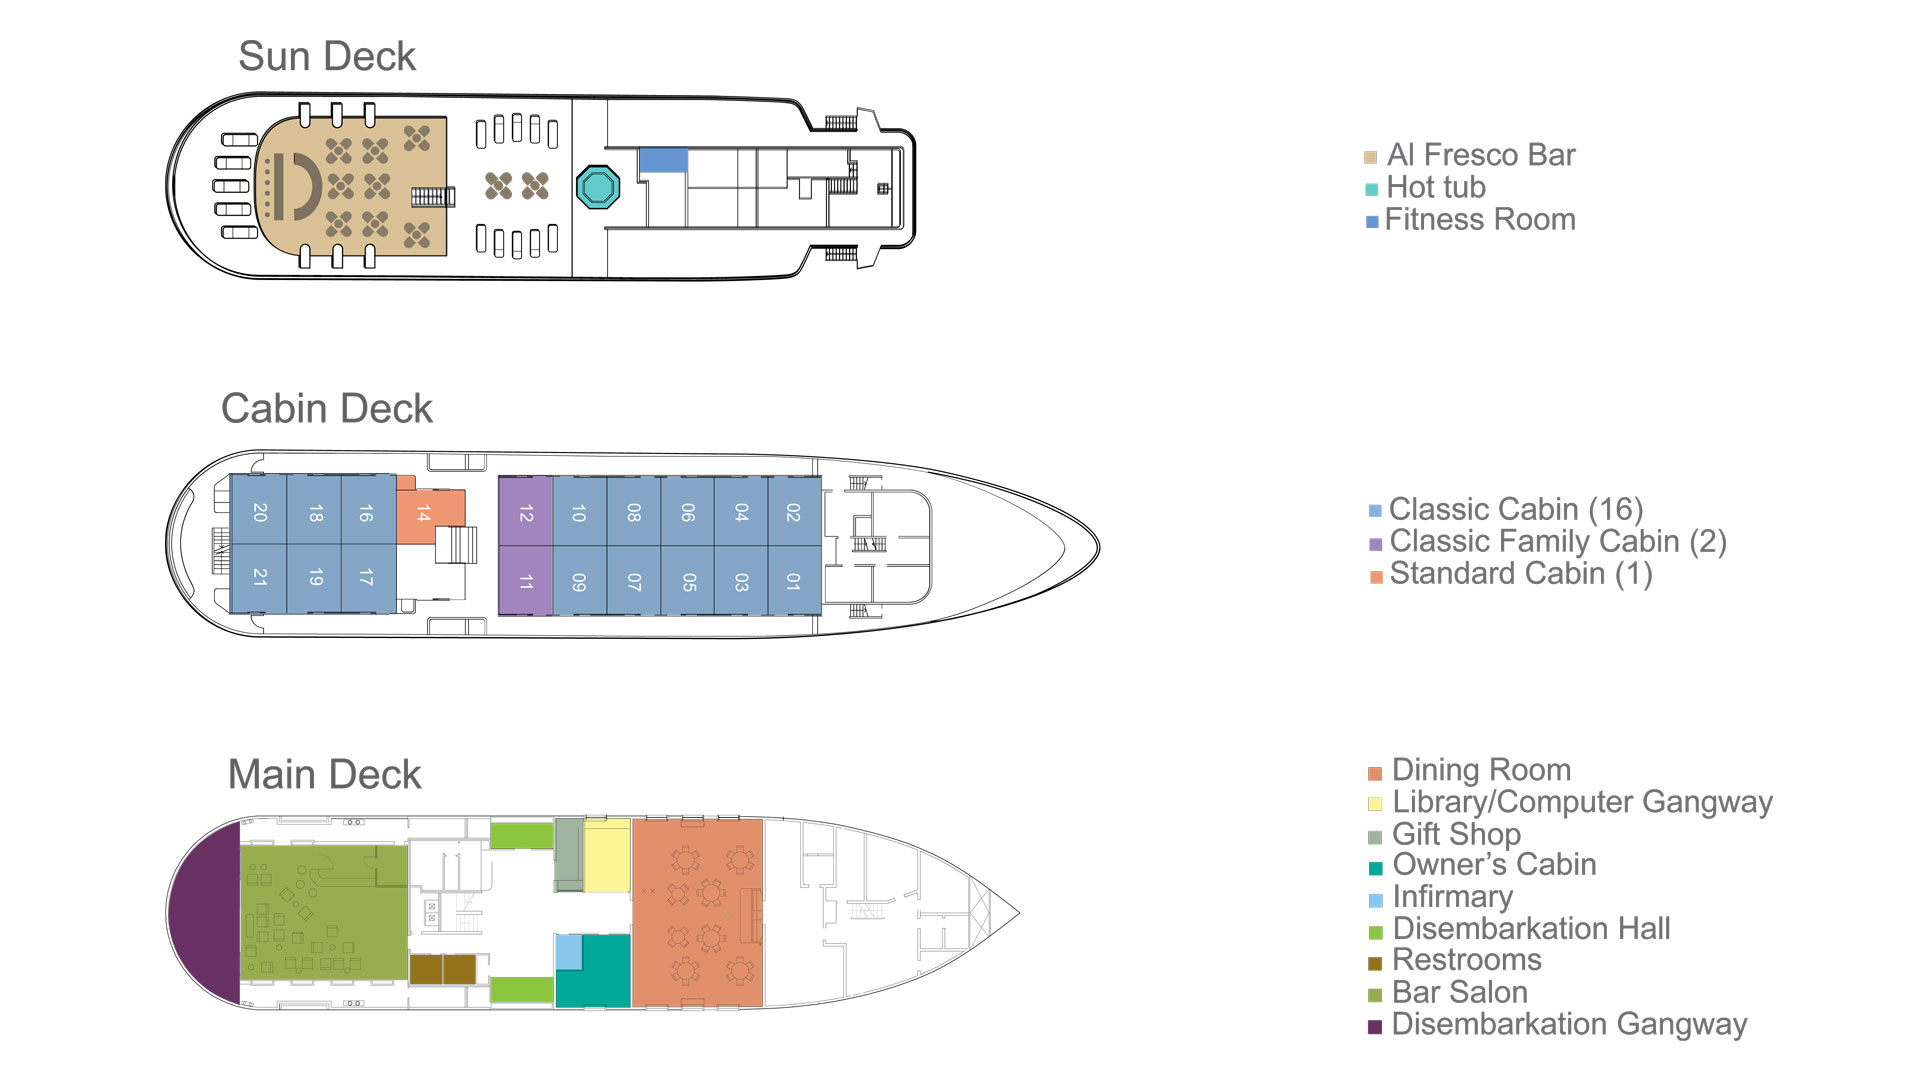 Deck plan of Isabela II yacht in Galapagos with 3 passenger decks, 20 cabins & various social areas.